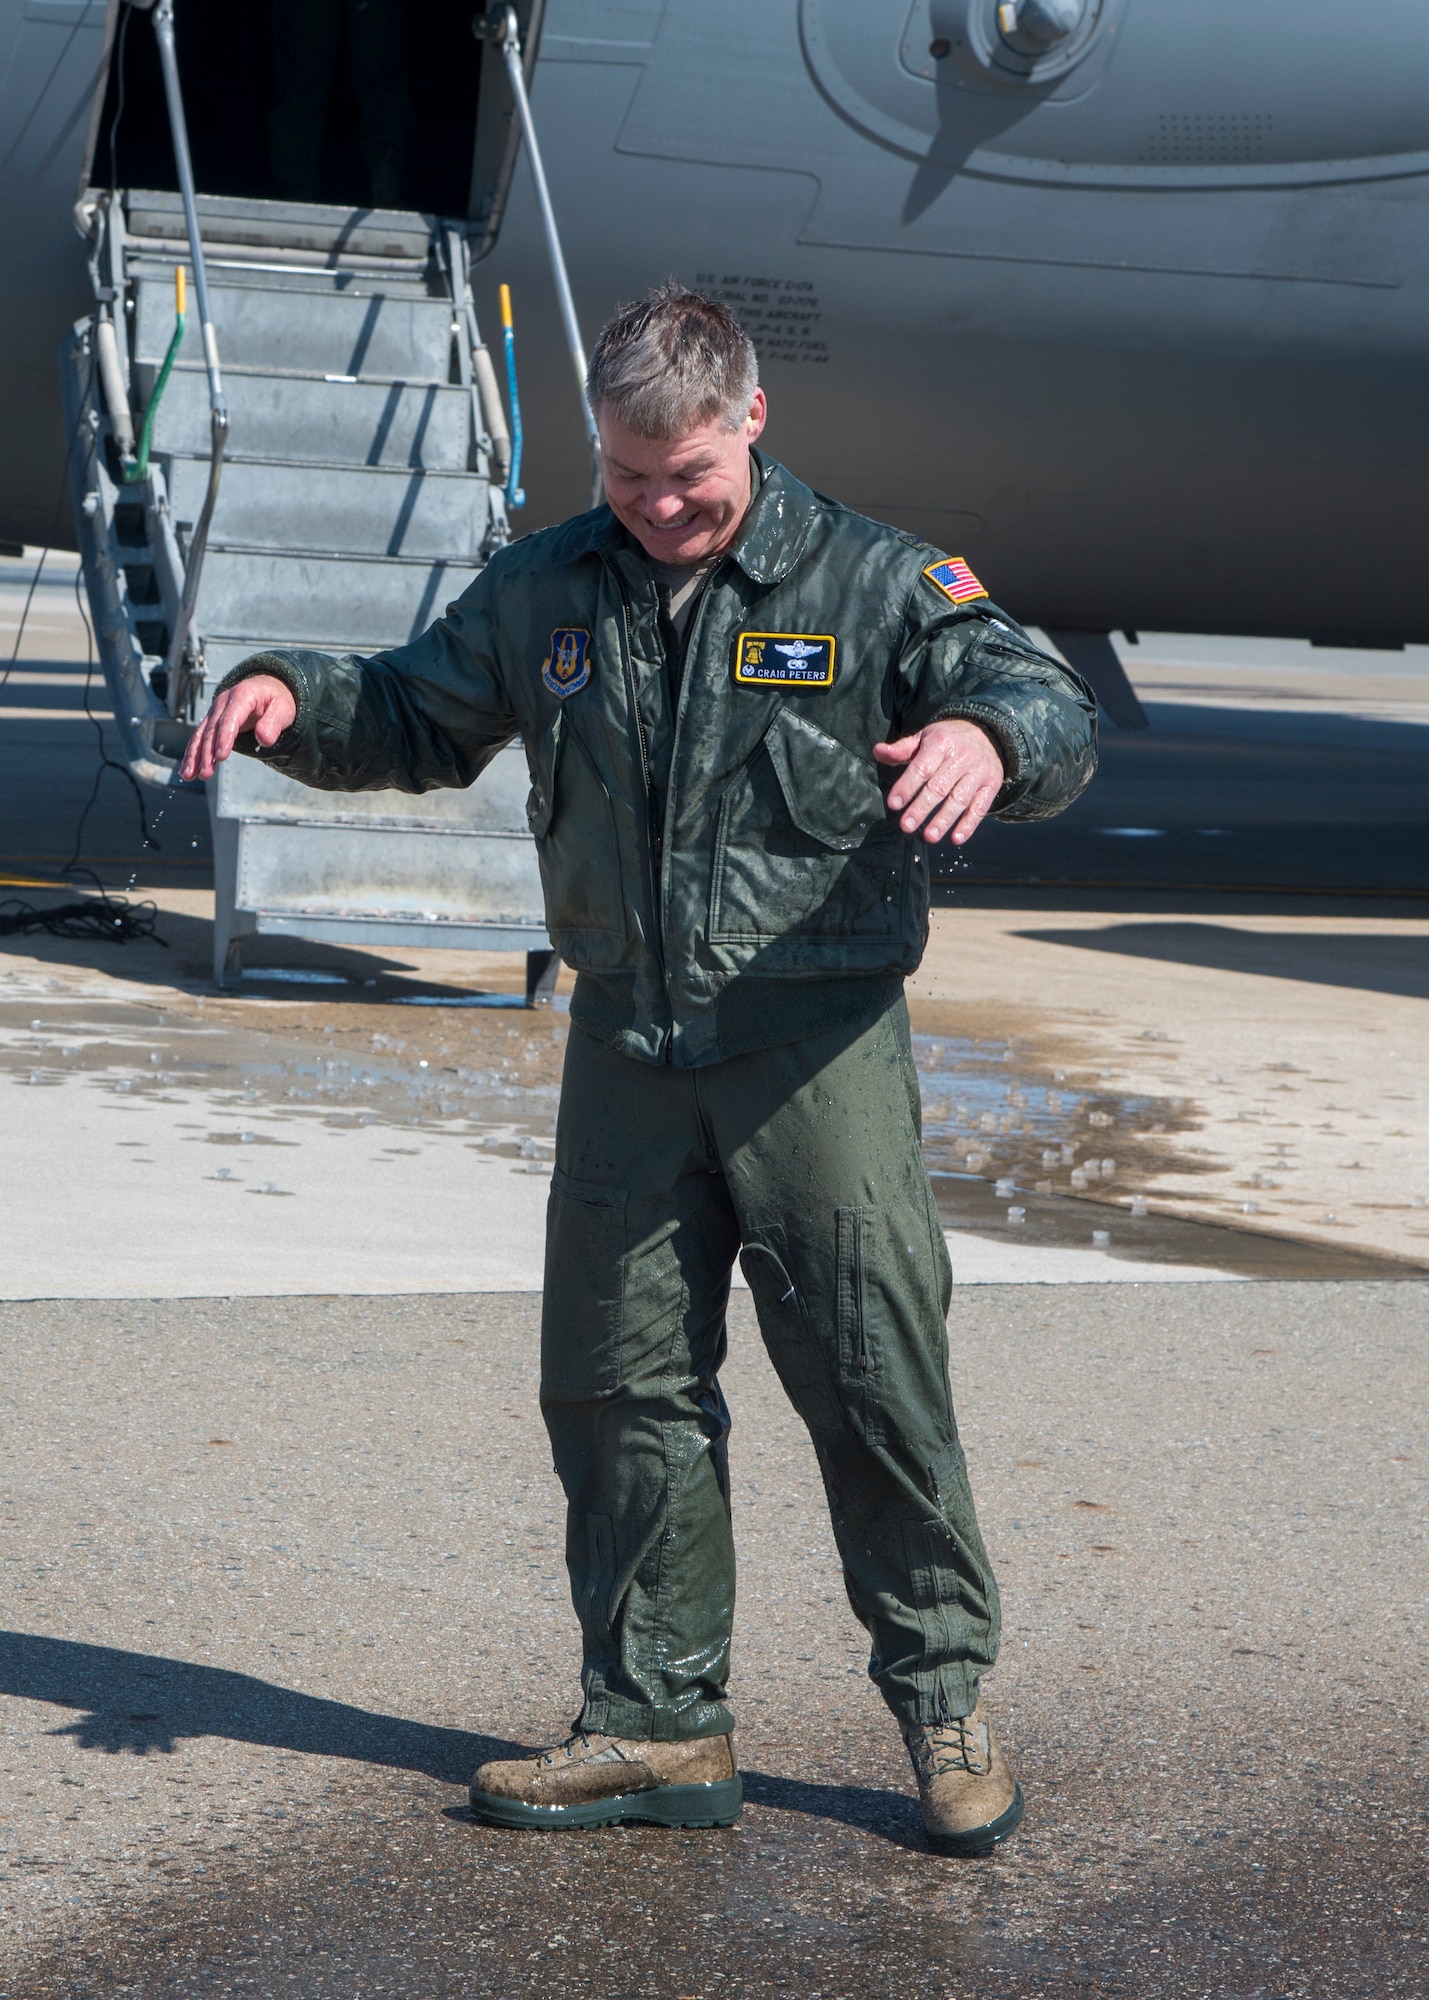 Col. Peters logs final flight at Dover AFB